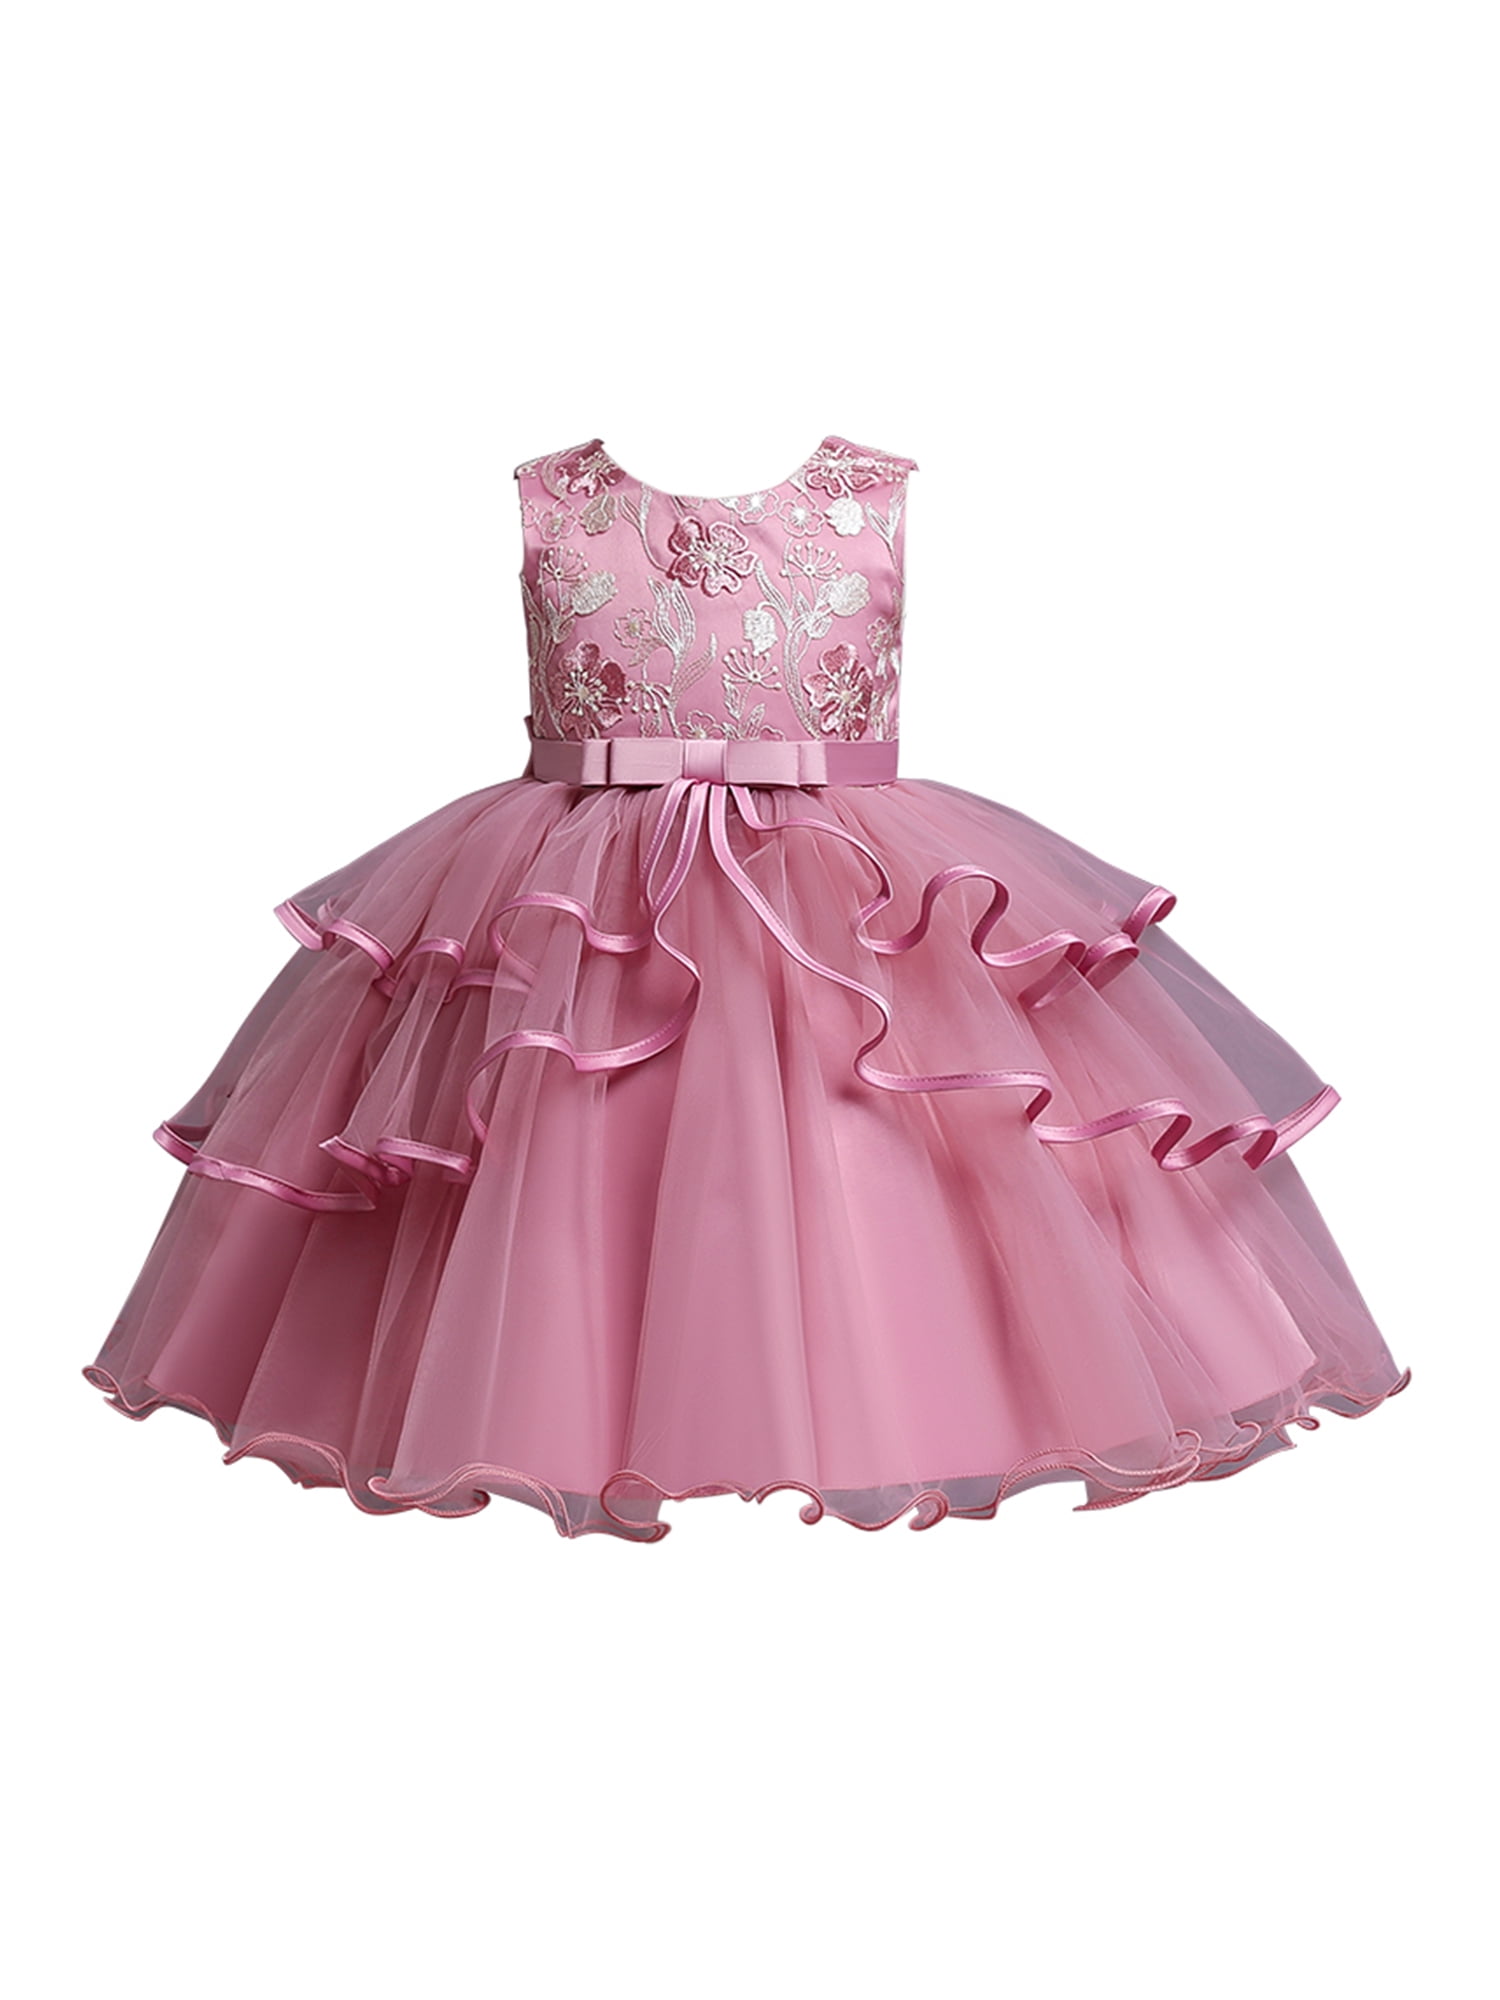 Flower Girl Princess Dress Kids Baby Party Wedding Pageant Tutu Skirts Clothes 